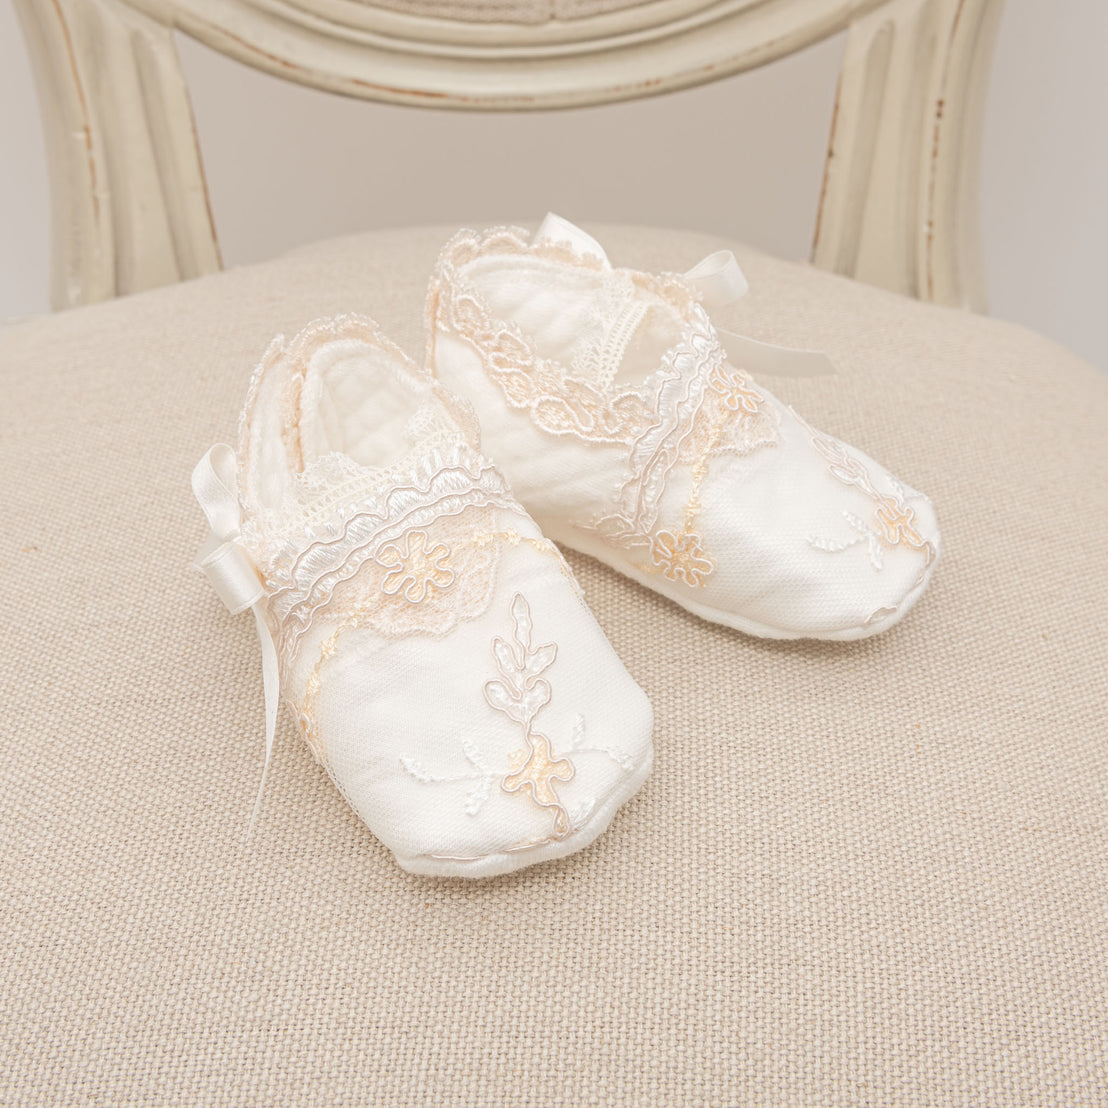 A pair of delicate, white Kristina baby shoes with floral patterns and lace details, resting on a textured beige cushion against a vintage-inspired chair background.